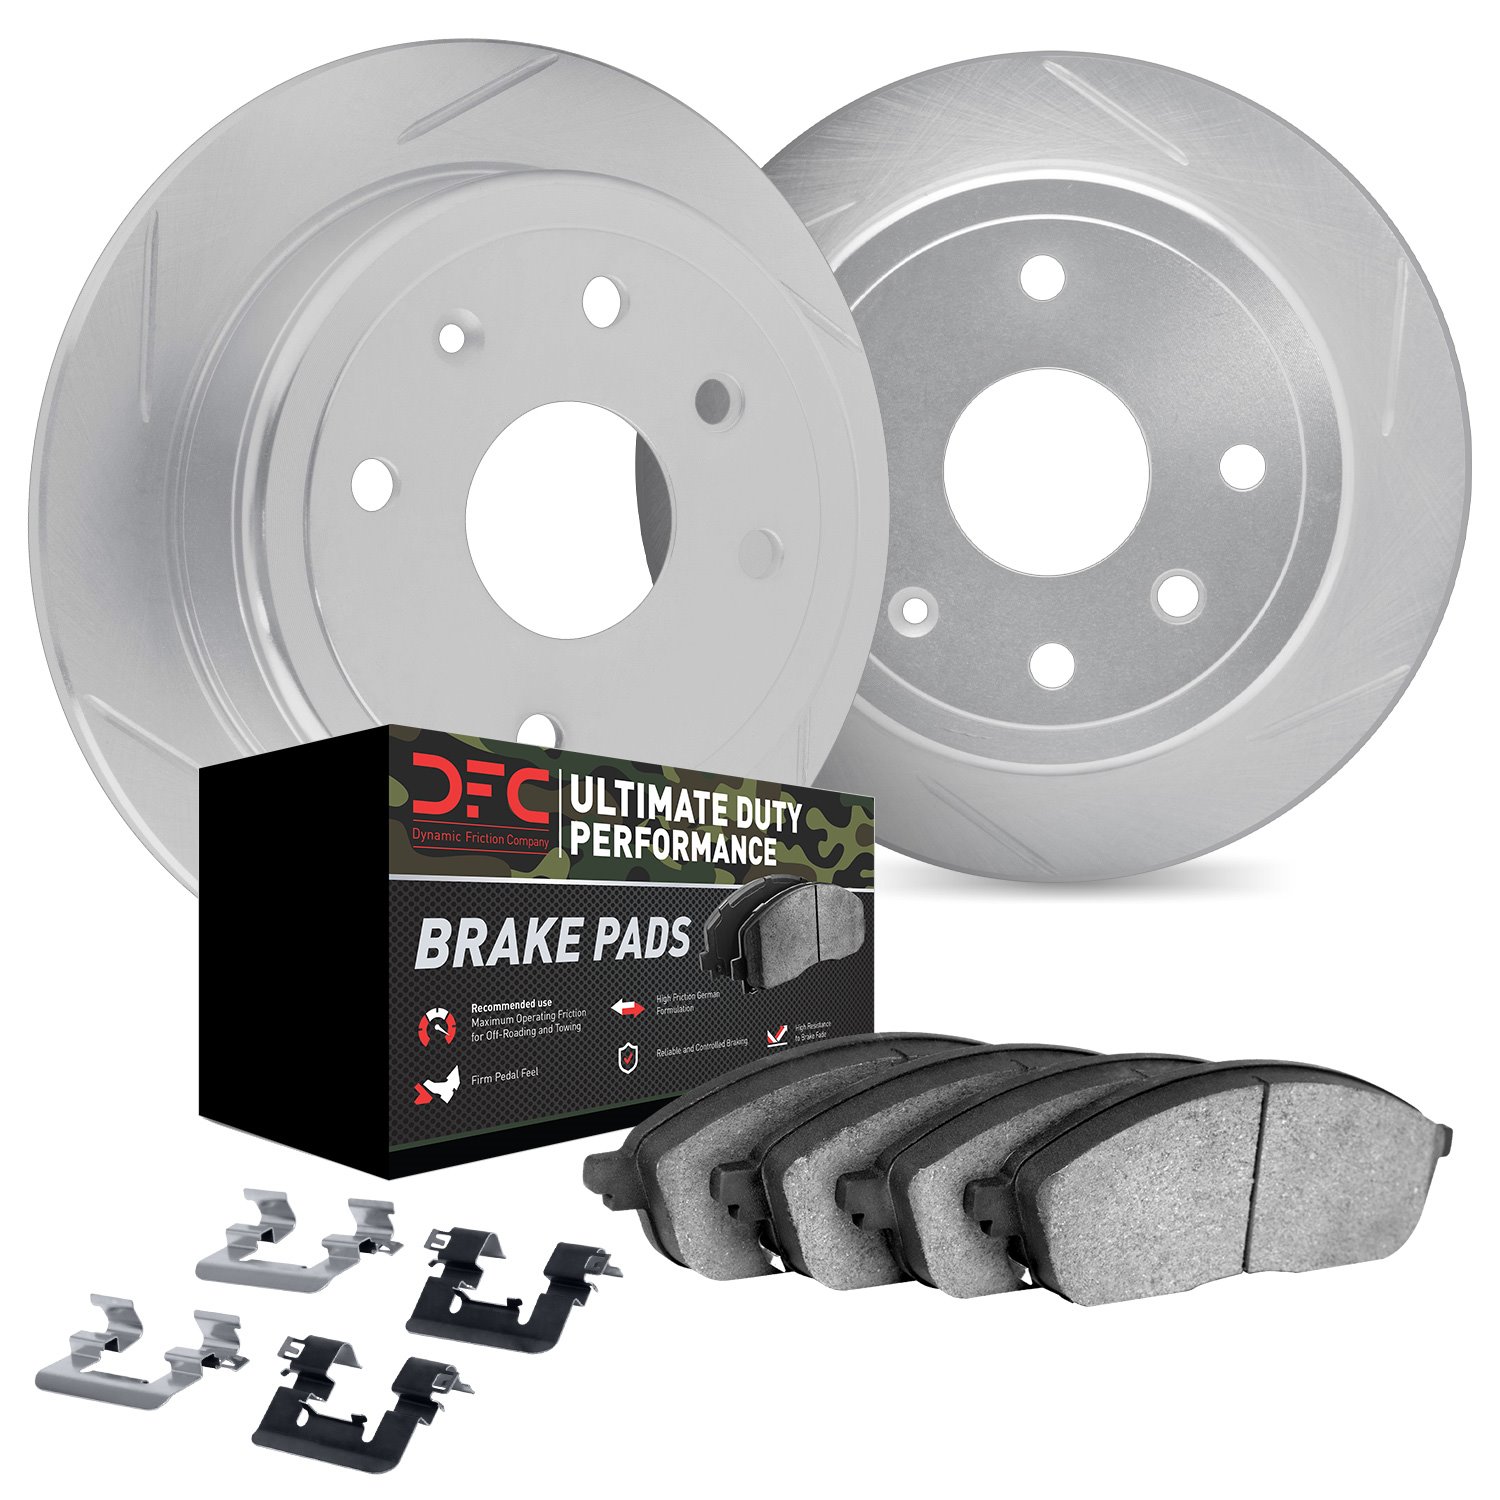 5412-55001 Slotted Brake Rotors with Ultimate-Duty Brake Pads Kit & Hardware [Silver], 2003-2011 Ford/Lincoln/Mercury/Mazda, Pos